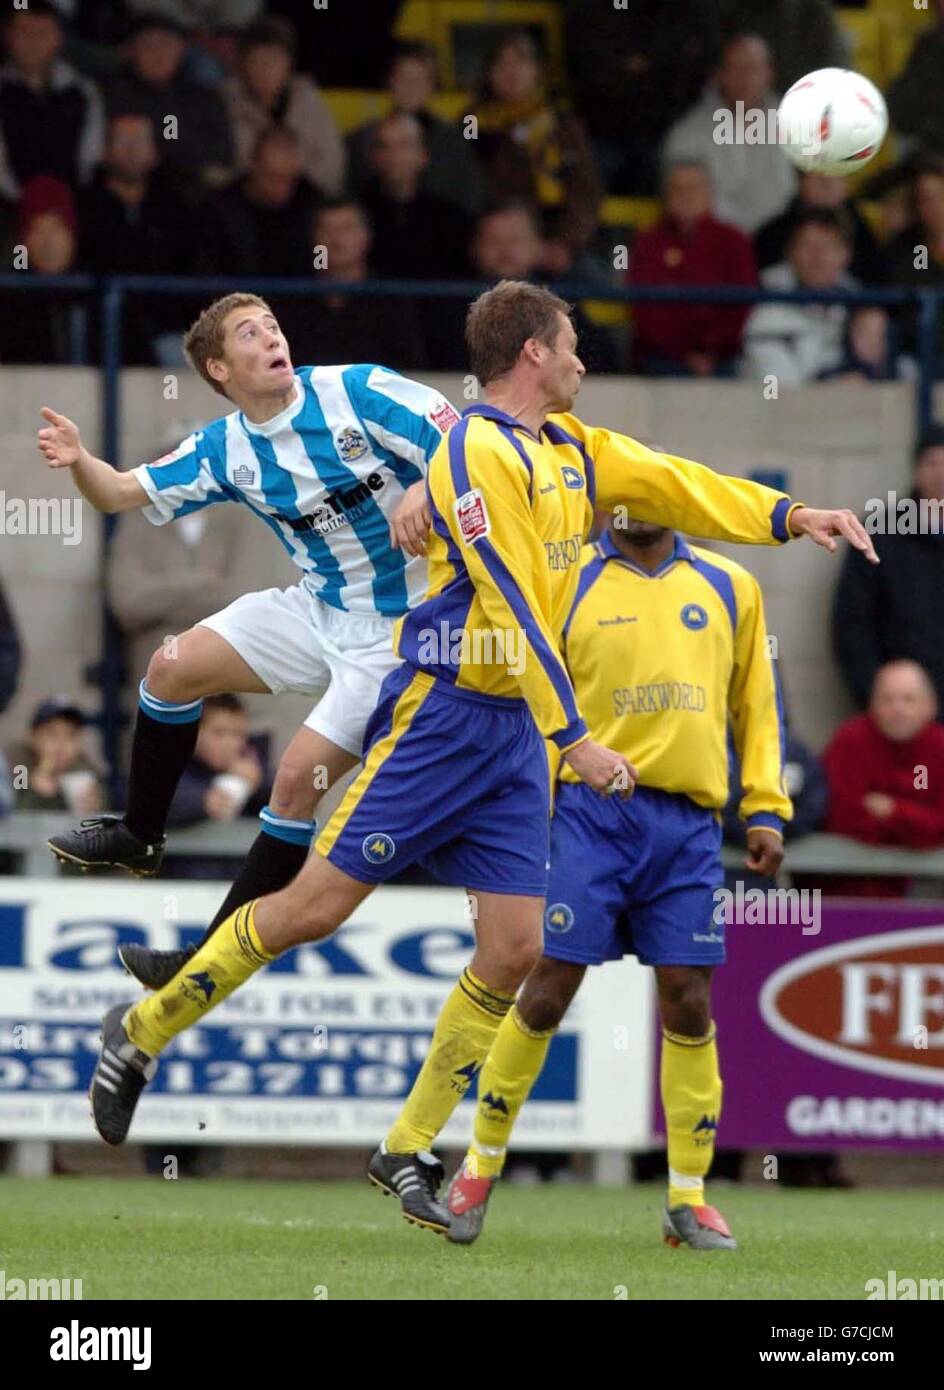 Torquay's Jason Fowler (R) contests the ball with Huddersfield's David Mirkin during their Coca Cola League One match at Plainmoor, Torquay Saturday October 9, 2004. PA Photo: Richard Lappas. NO UNOFFICIAL CLUB WEBSITE USE. Stock Photo